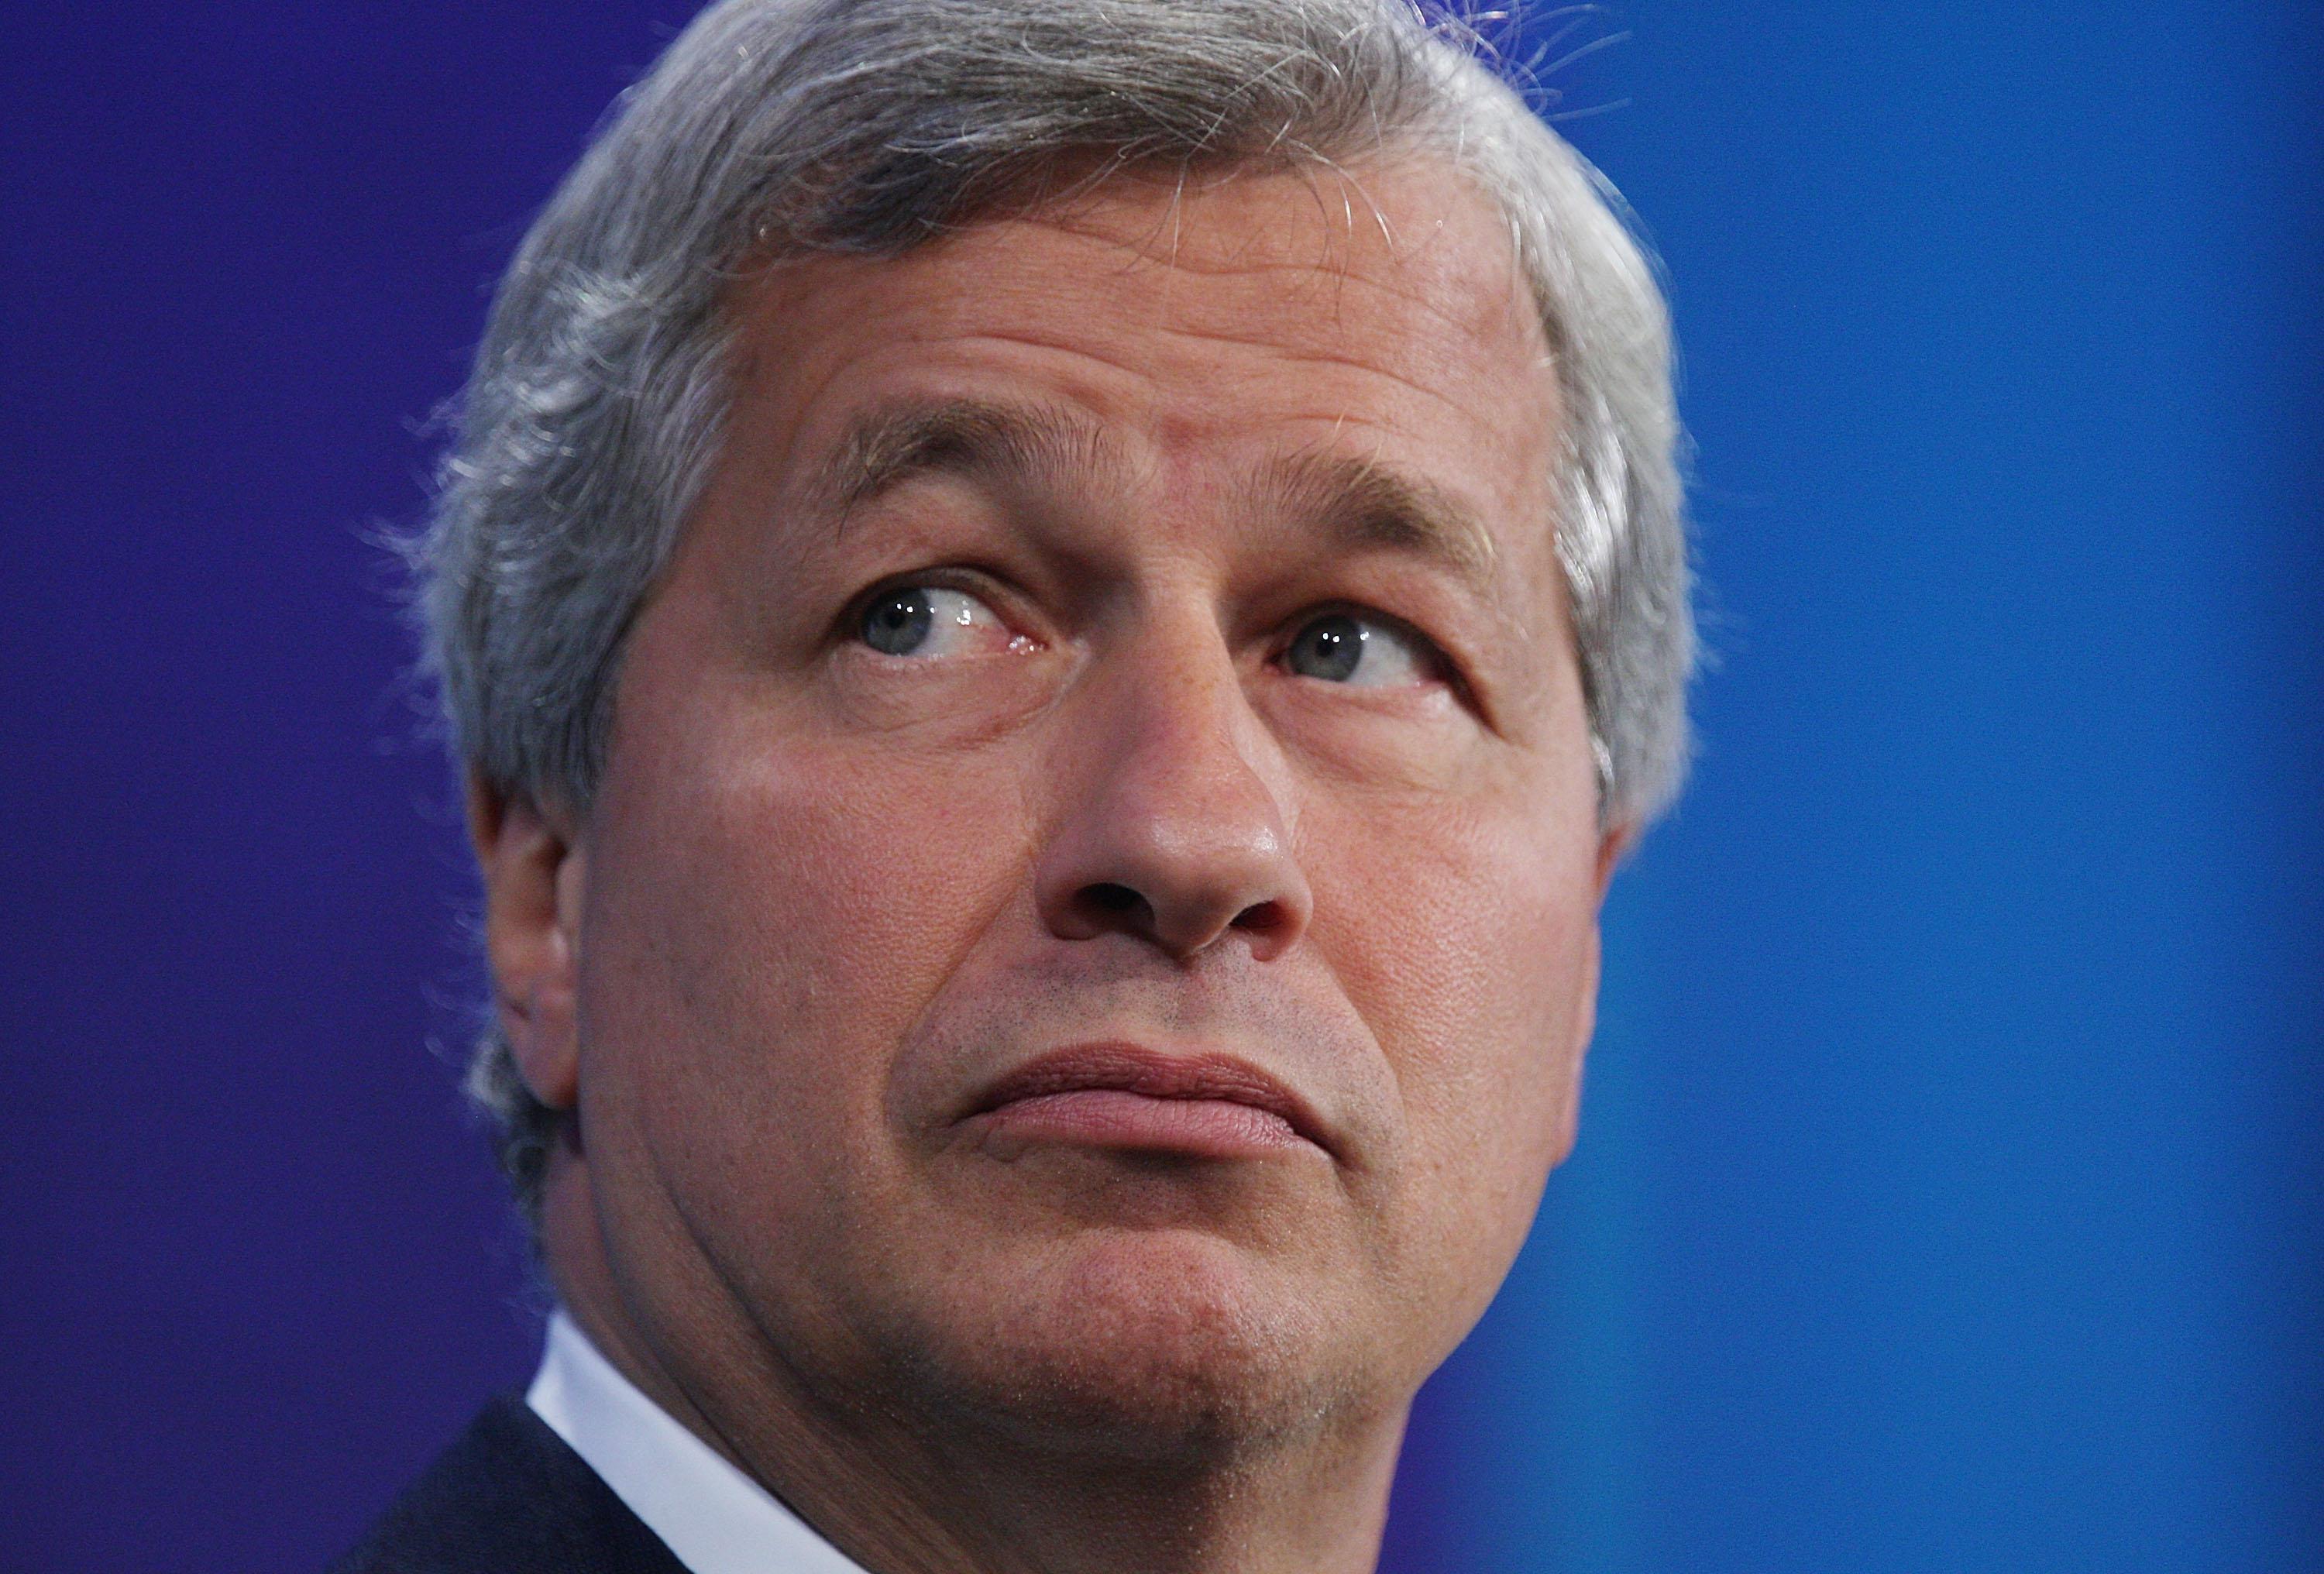 James Dimon, Chairman and CEO of JP Morgan Chase